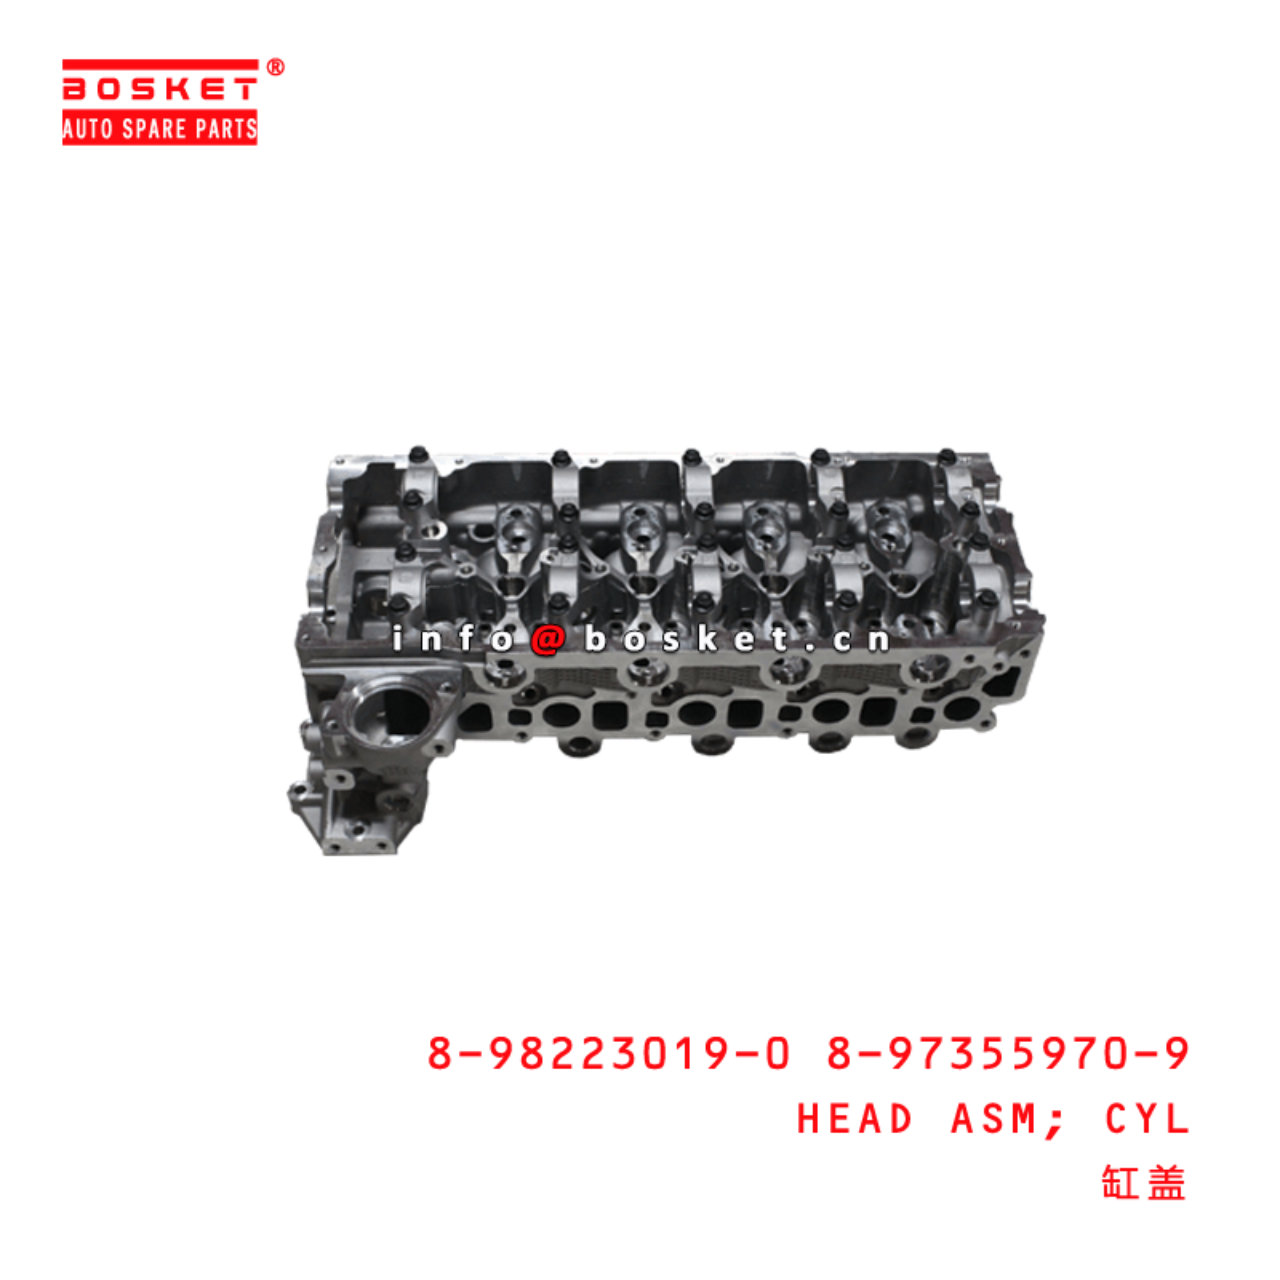 8-98223019-0 8-97355970-9 Cylinder Head Assembly 8982230190 8973559709 Suitable for ISUZU TFR 4JJ1-T